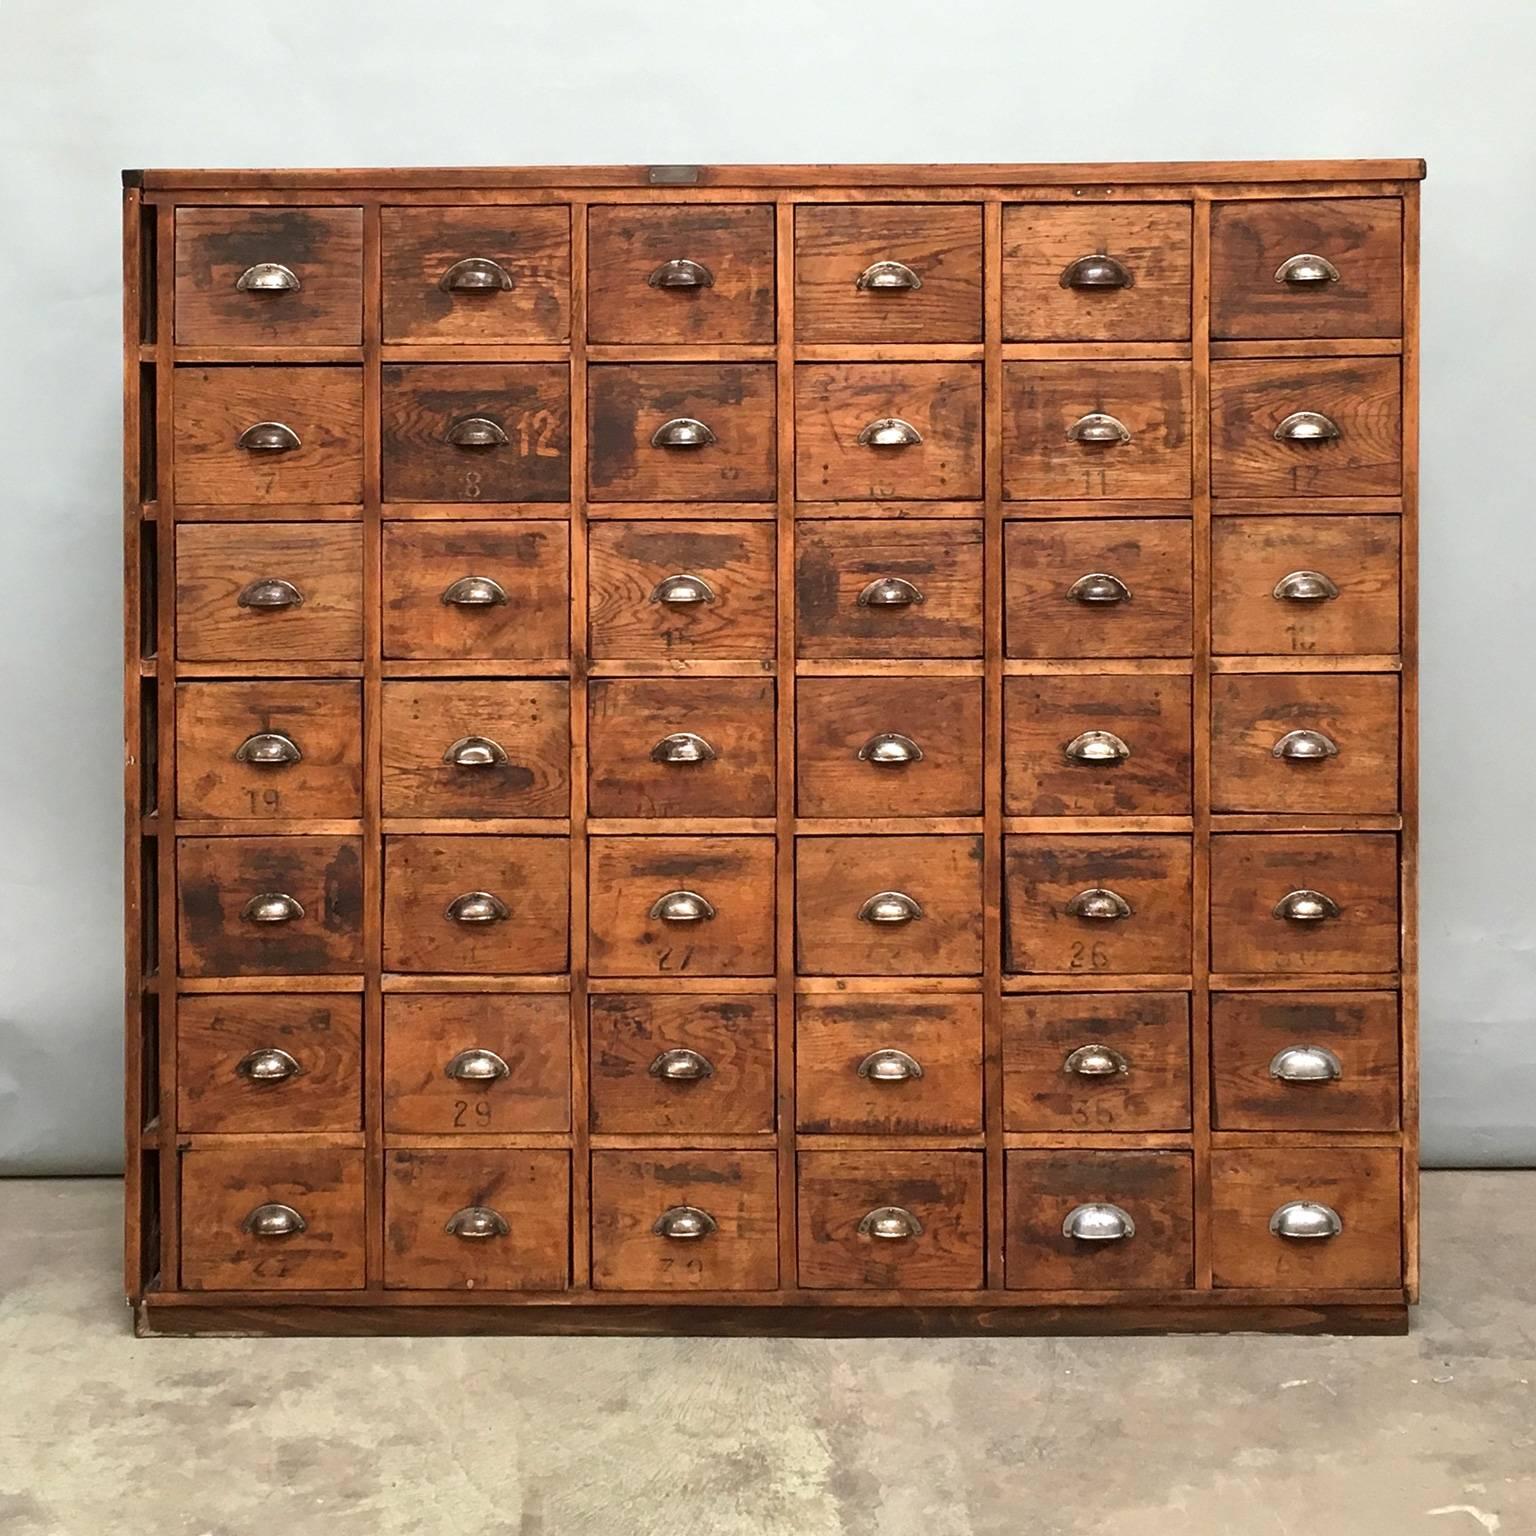 This Industrial pine wooden tool cabinet was designed during the 1930s and manufactured in Hungary. This cabinet features a pinewood frame with six columns of seven drawers. It is in a good vintage condition with signs of use.